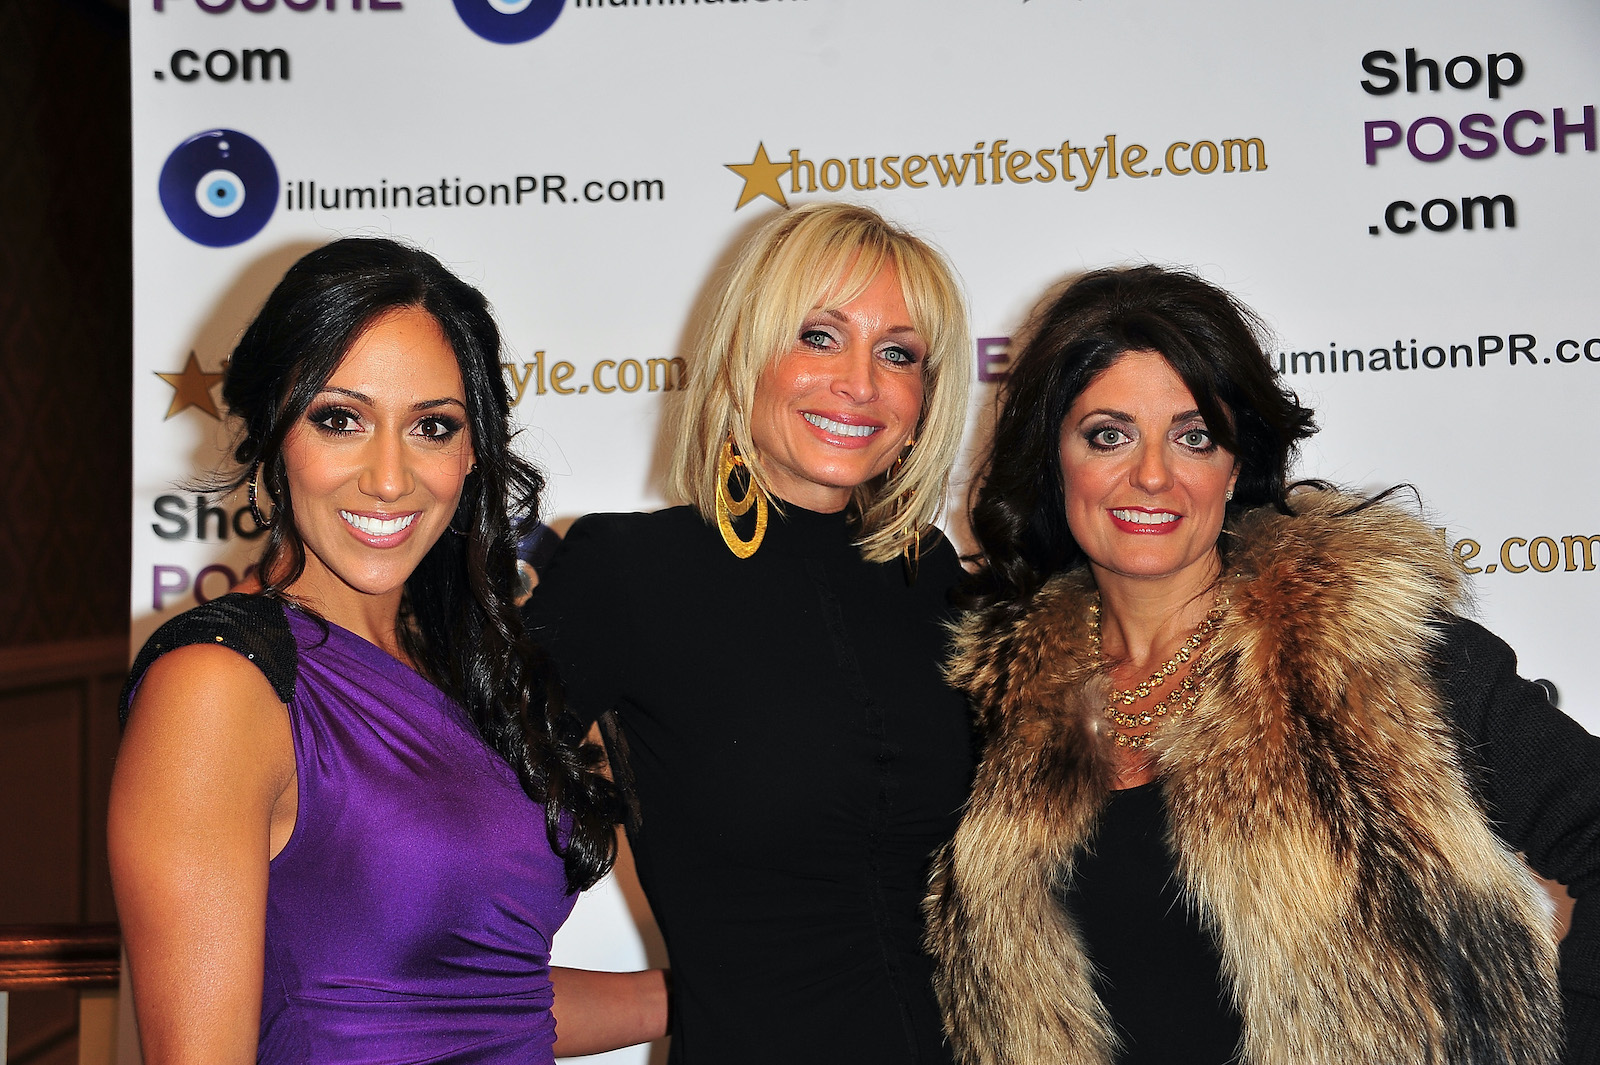 Melissa Gorga, Kim DePaola, and Kathy Wakile from 'RHONJ' attended the Posche Fashion Show in 2010